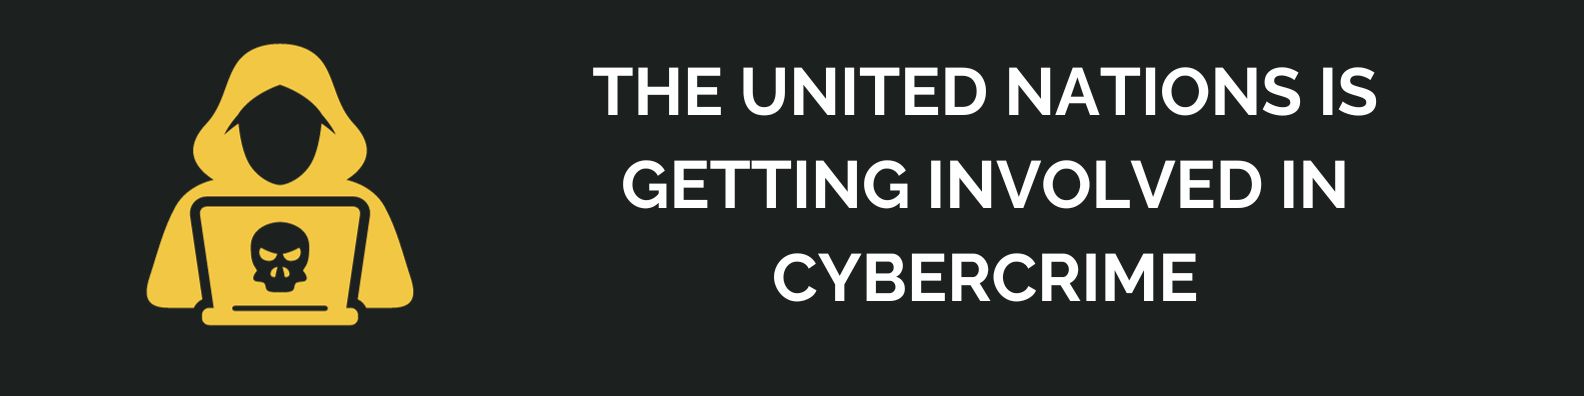 Why The United Nations Is Getting Involved in Cybercrime